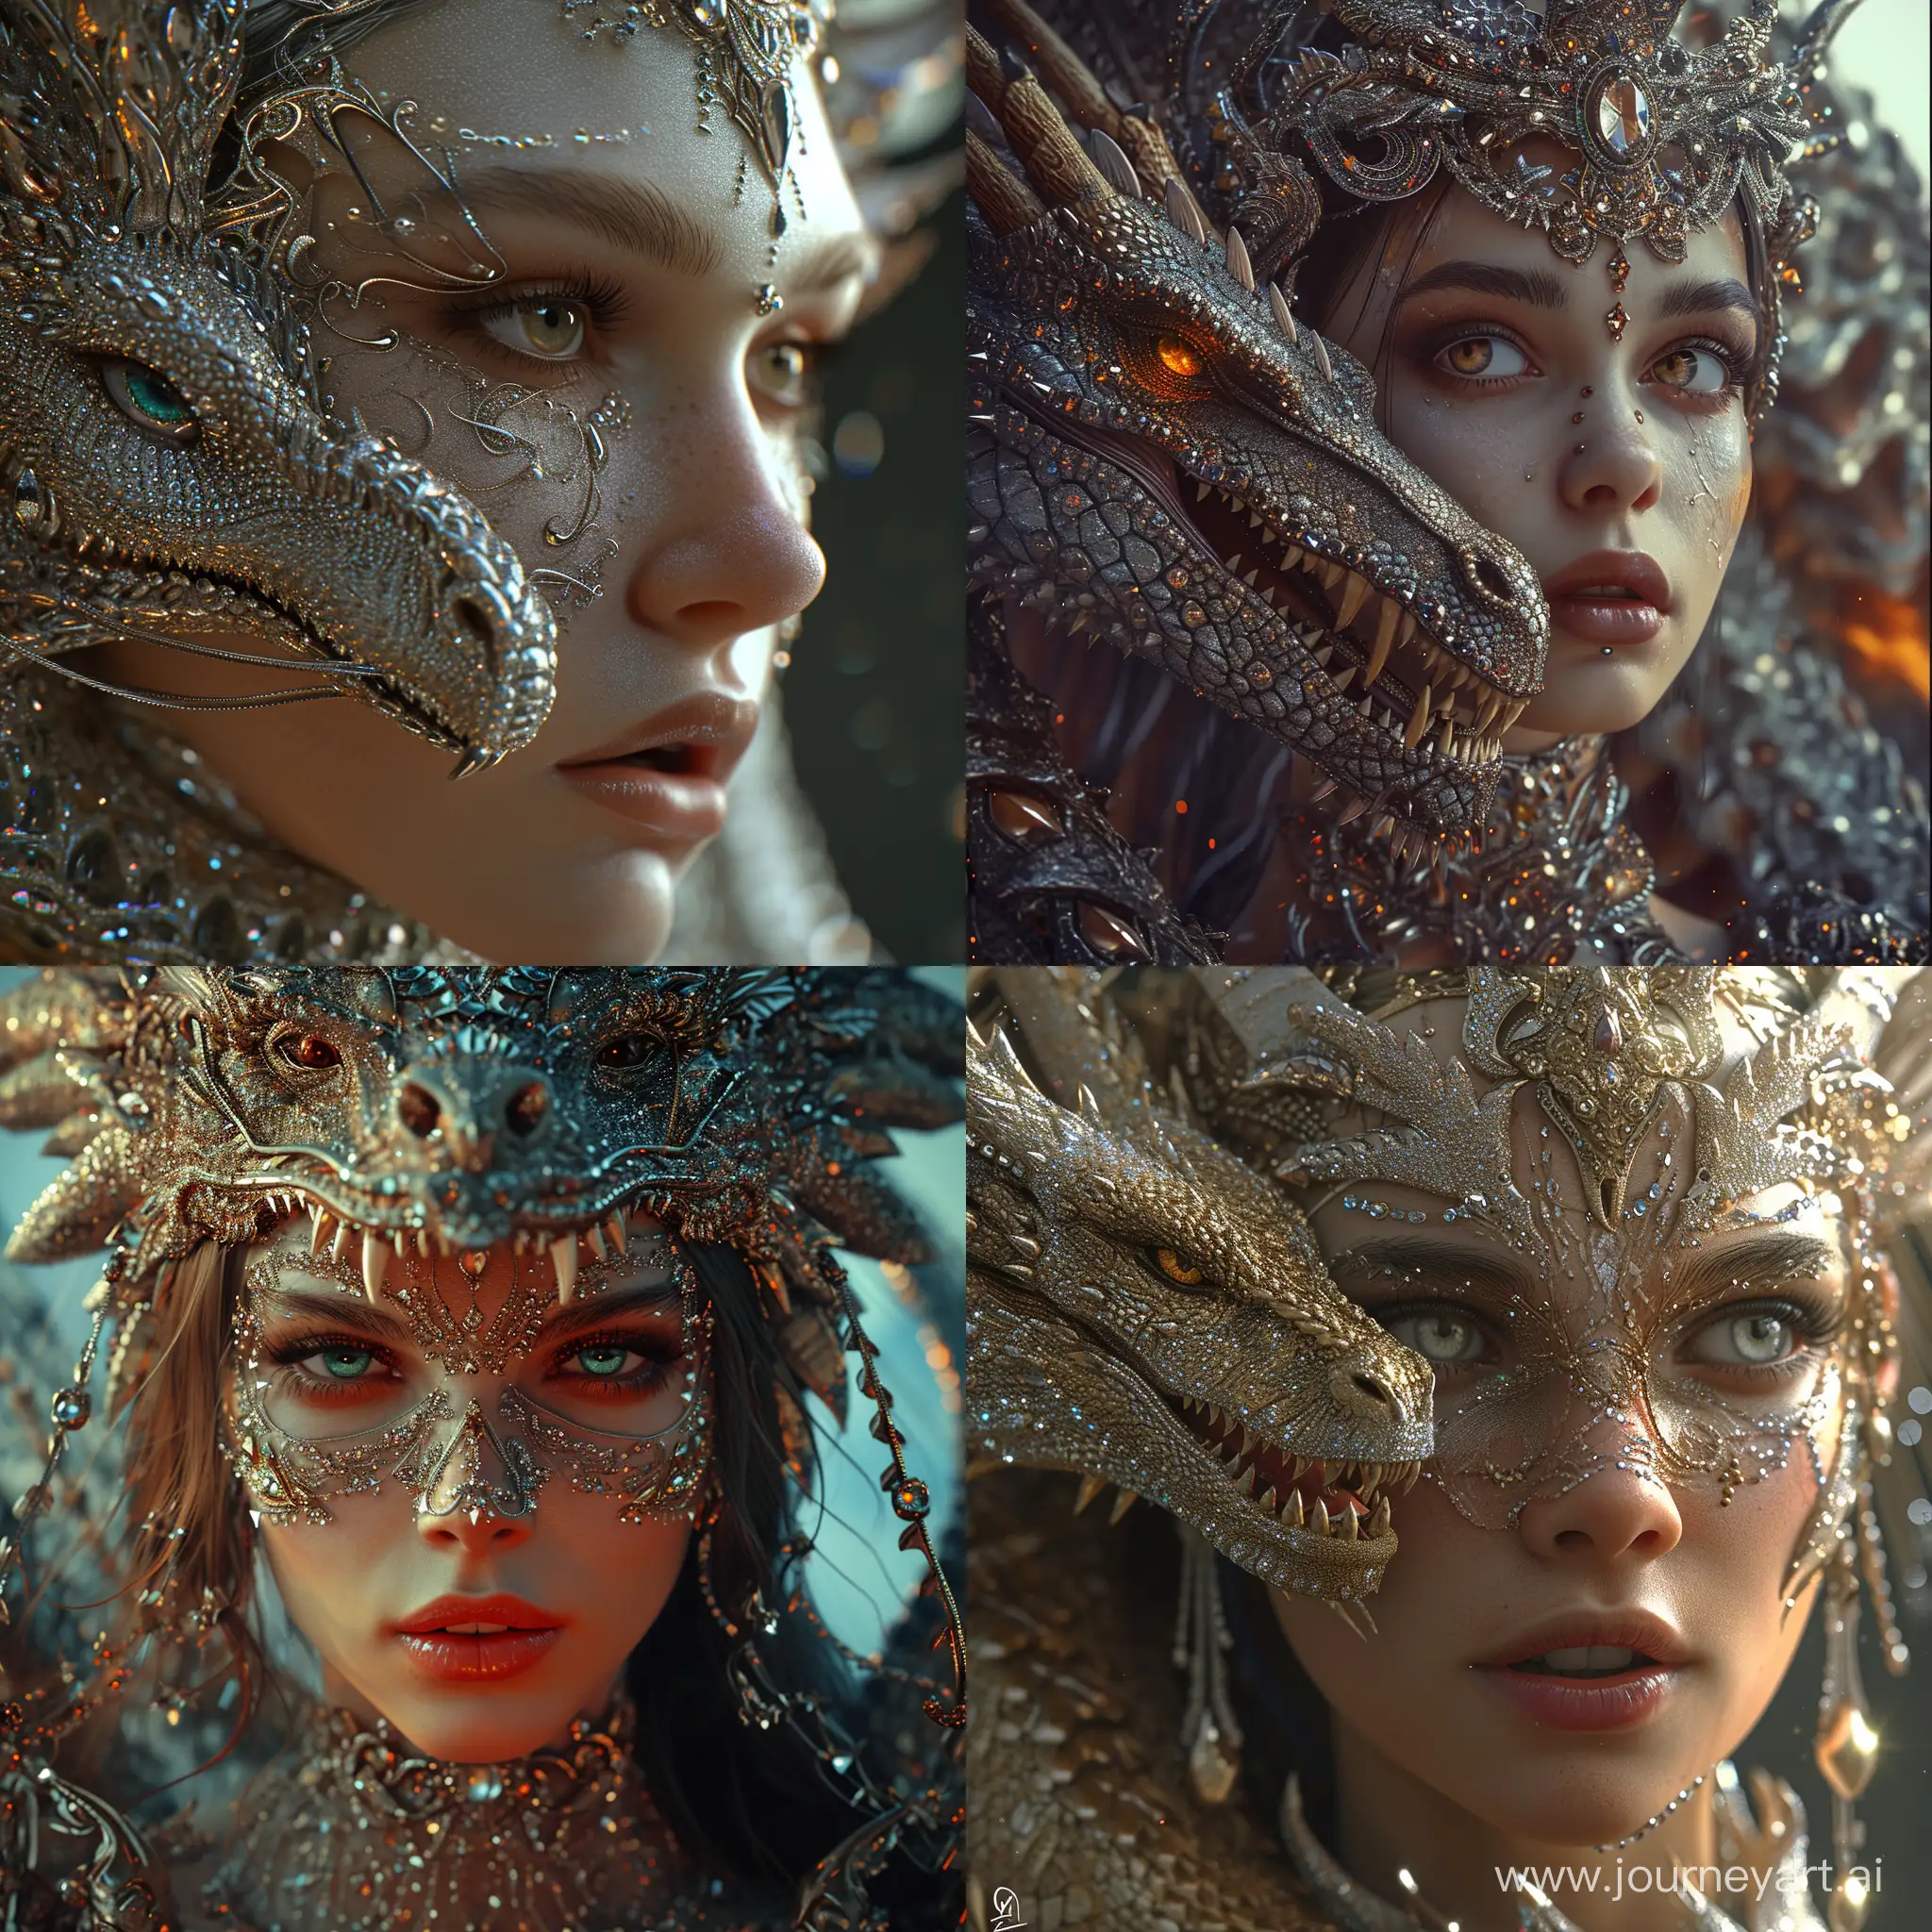 Enchanting-Fusion-of-Woman-and-Dragon-in-Hypermaximalistic-Fantasy-Art